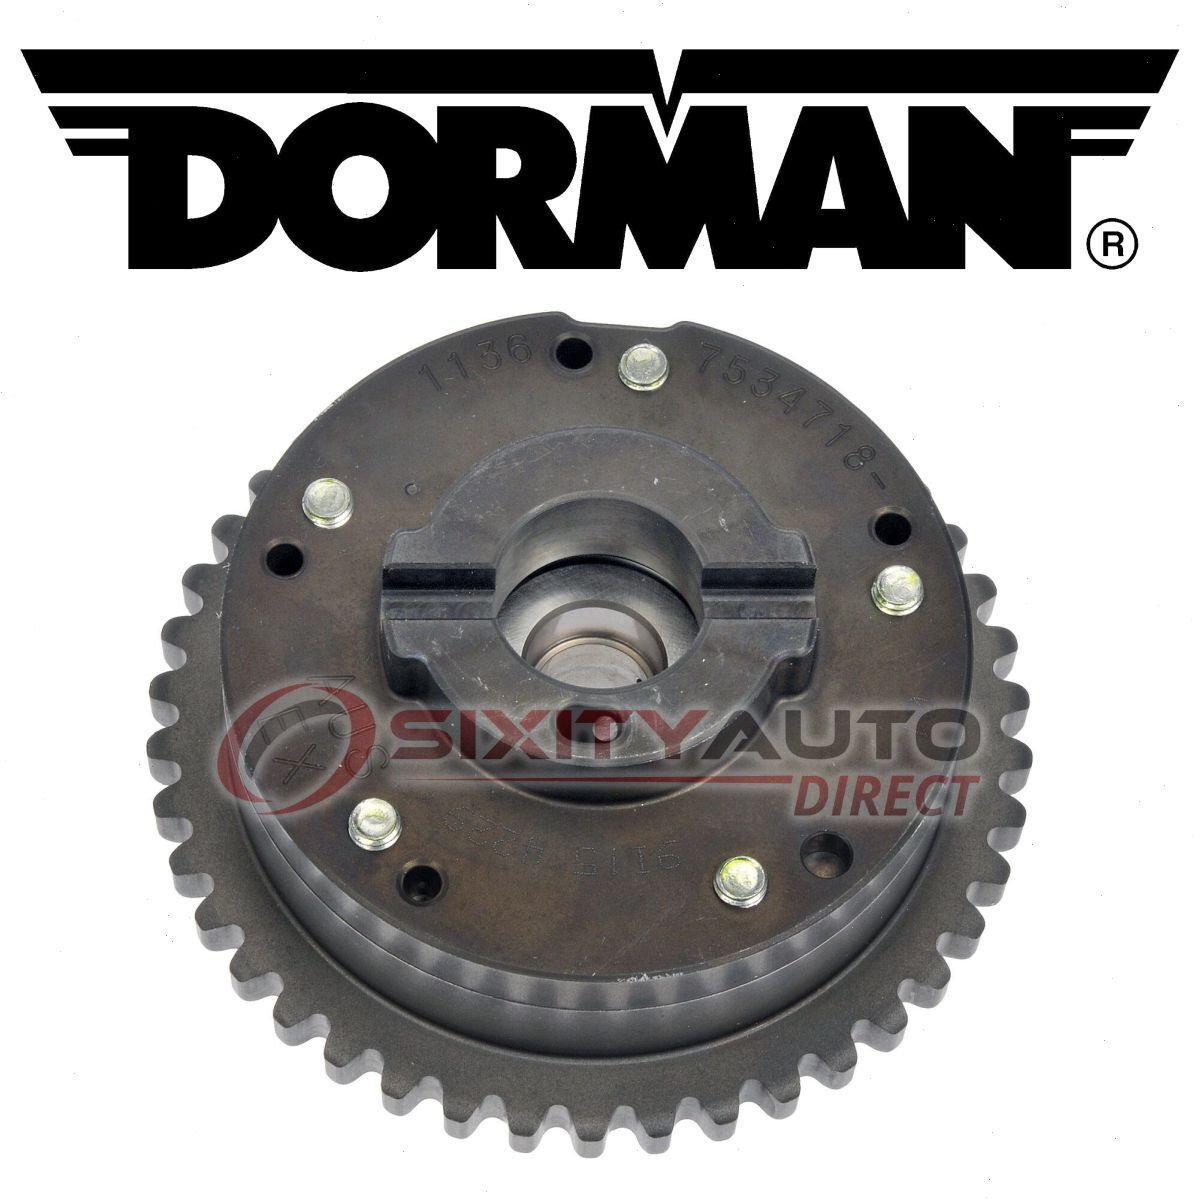 Dorman Exhaust Right Engine Variable Timing Sprocket for 2006-2011 BMW 650Ci rh